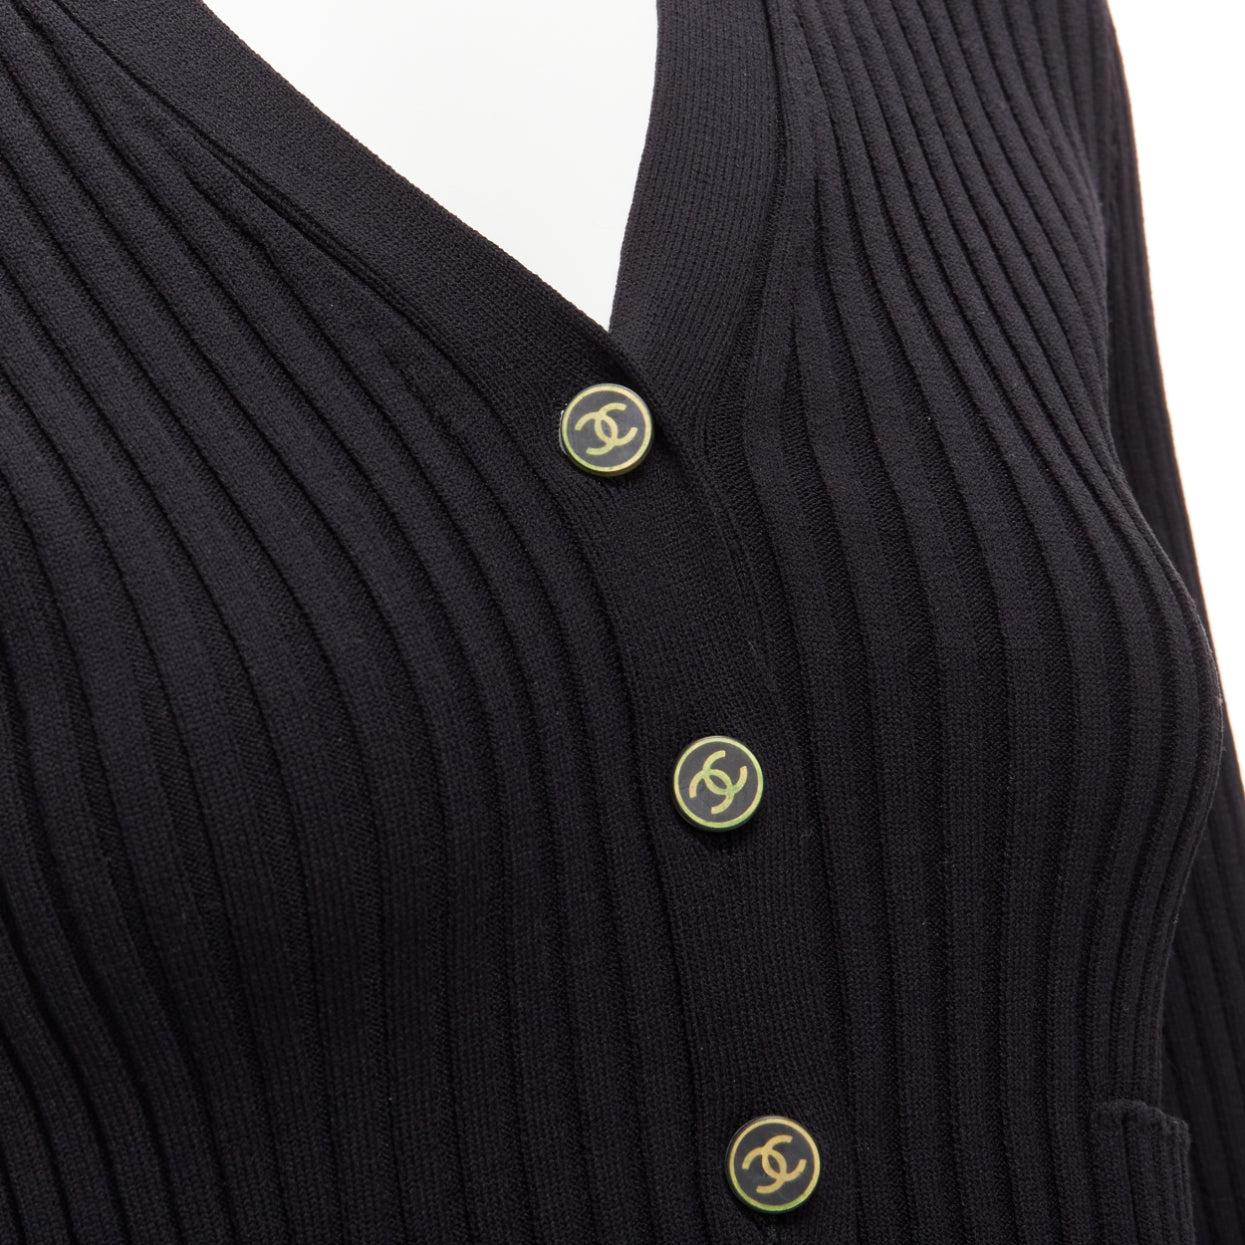 CHANEL 01A Vintage gold CC logo button ribbed cropped cardigan FR42 L
Reference: TGAS/D00452
Brand: Chanel
Designer: Karl Lagerfeld
Collection: 01A
Material: Nylon
Color: Black
Pattern: Solid
Closure: Button
Extra Details: CC logo buttons.
Made in: